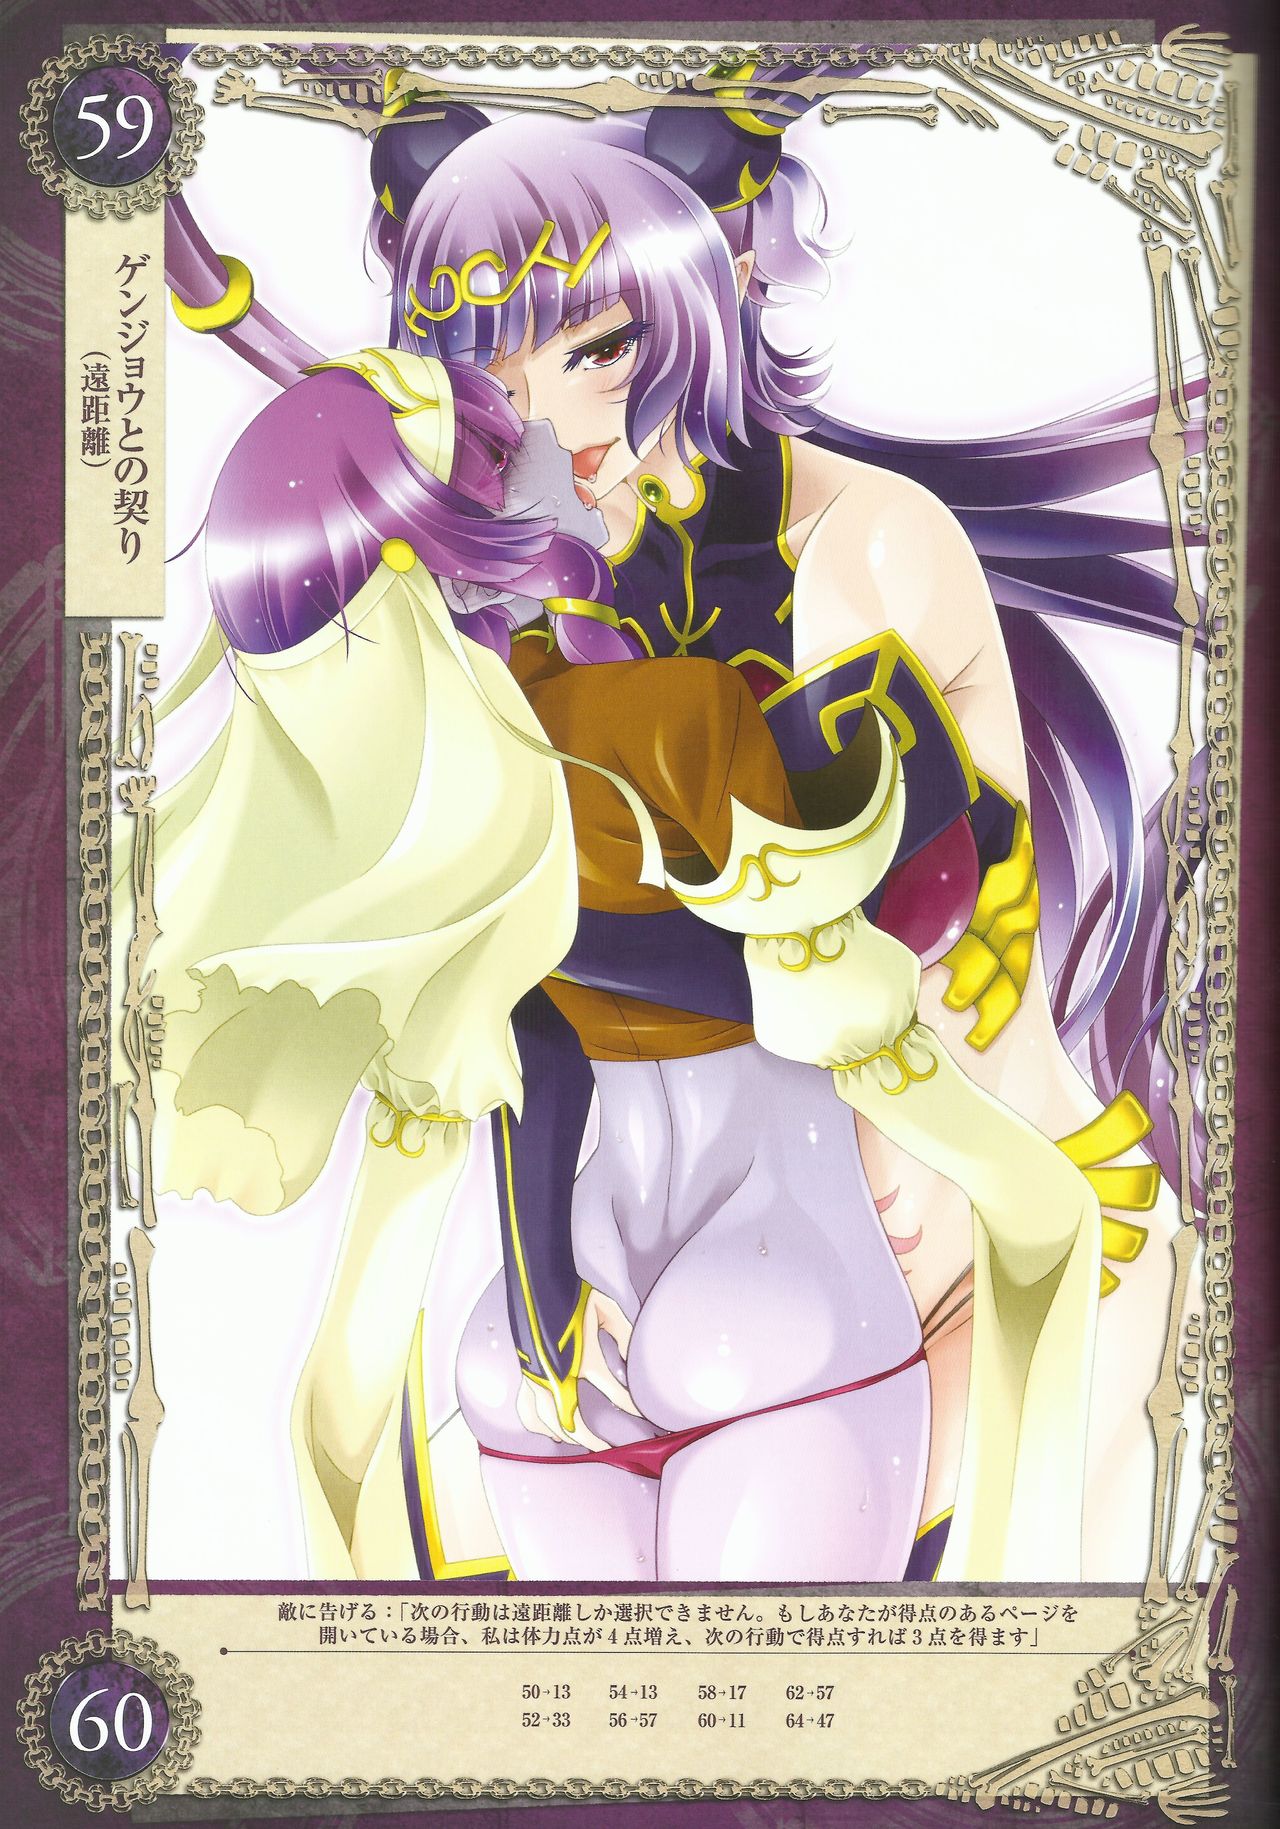 2girls aoi_nagisa_(metalder) ass breasts corruption french_kiss genjou_(queen's_blade) highres jewelry kiss large_breasts looking_at_viewer monk multiple_girls panties pubic_tattoo purple_hair queen's_blade queen's_blade_grimoire red_eyes seiten_(queen's_blade) tattoo underwear yuri zombie